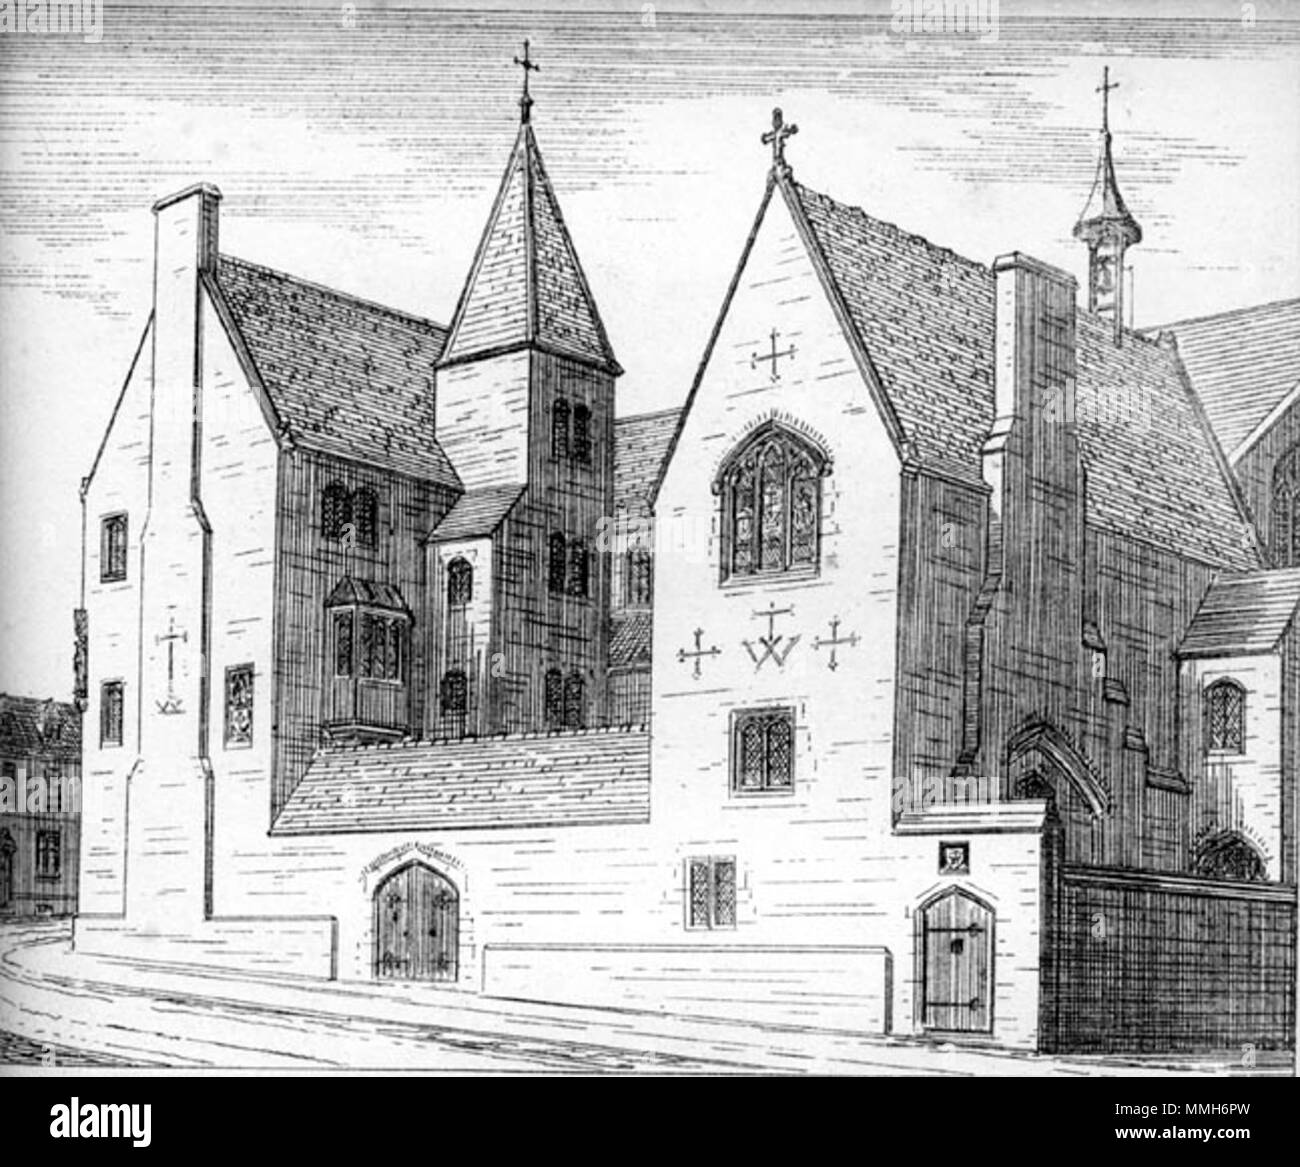 . English: A drawing, by Augustus Pugin, of his Bishop's House in Birmingham, England, from Pugin's Present State of Ecclesiastical Architecture, facing p. 102.  . before 1844.   Augustus Pugin  (1812–1852)       Alternative names Augustus Welby Northmore Pugin; A. W. N. Pugin  Description British architect  Date of birth/death 1 March 1812 14 September 1852  Location of birth/death Bloomsbury Ramsgate  Authority control  : Q313288 VIAF:?17247761 ISNI:?0000 0000 8096 1987 ULAN:?500008414 LCCN:?n50027100 NLA:?35435757 WorldCat Bishops House, Birmingham by Augustus Pugin Stock Photo